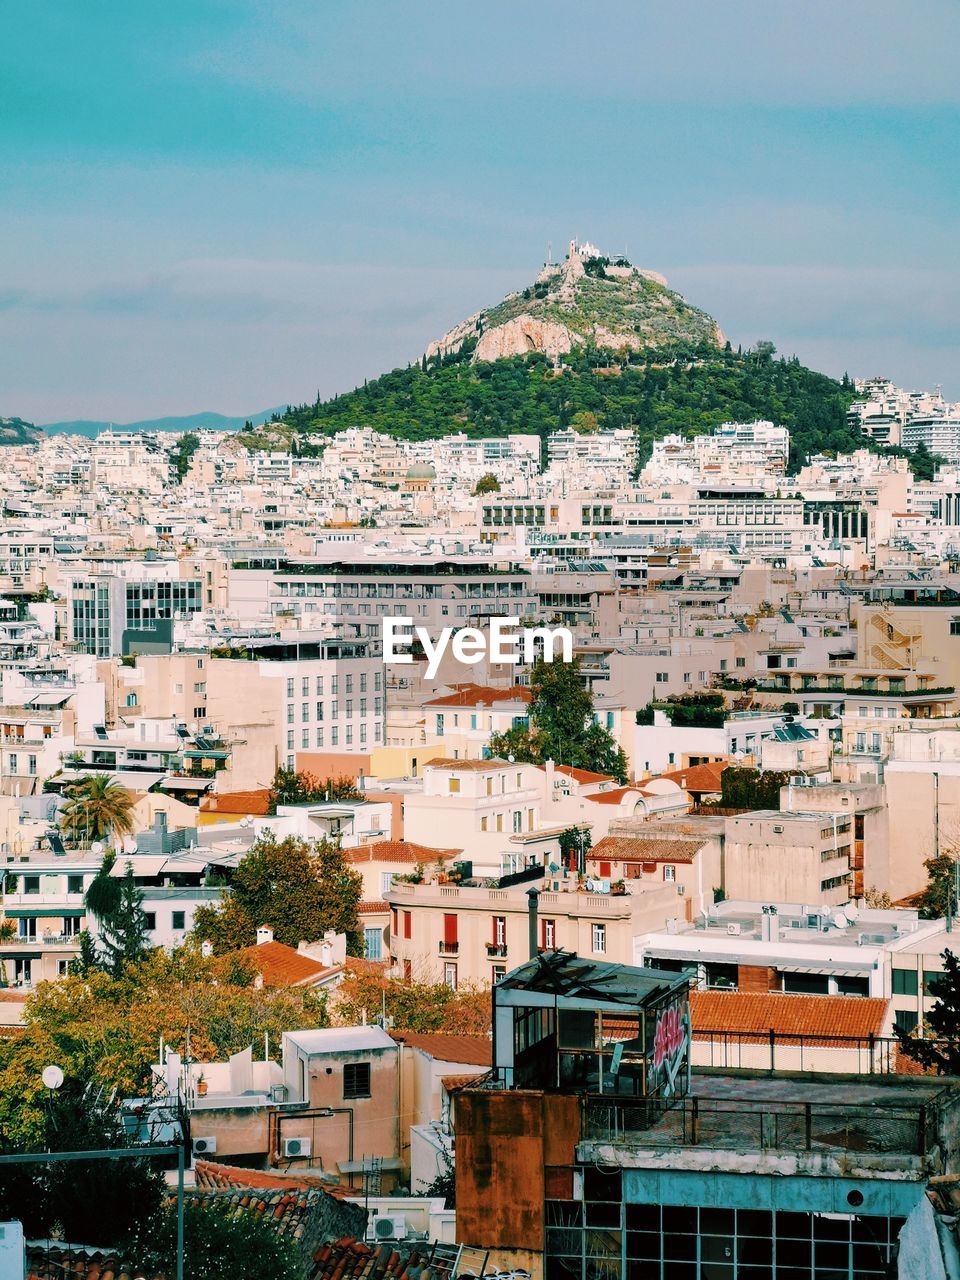 View of athens with mount lycabettus in the distance